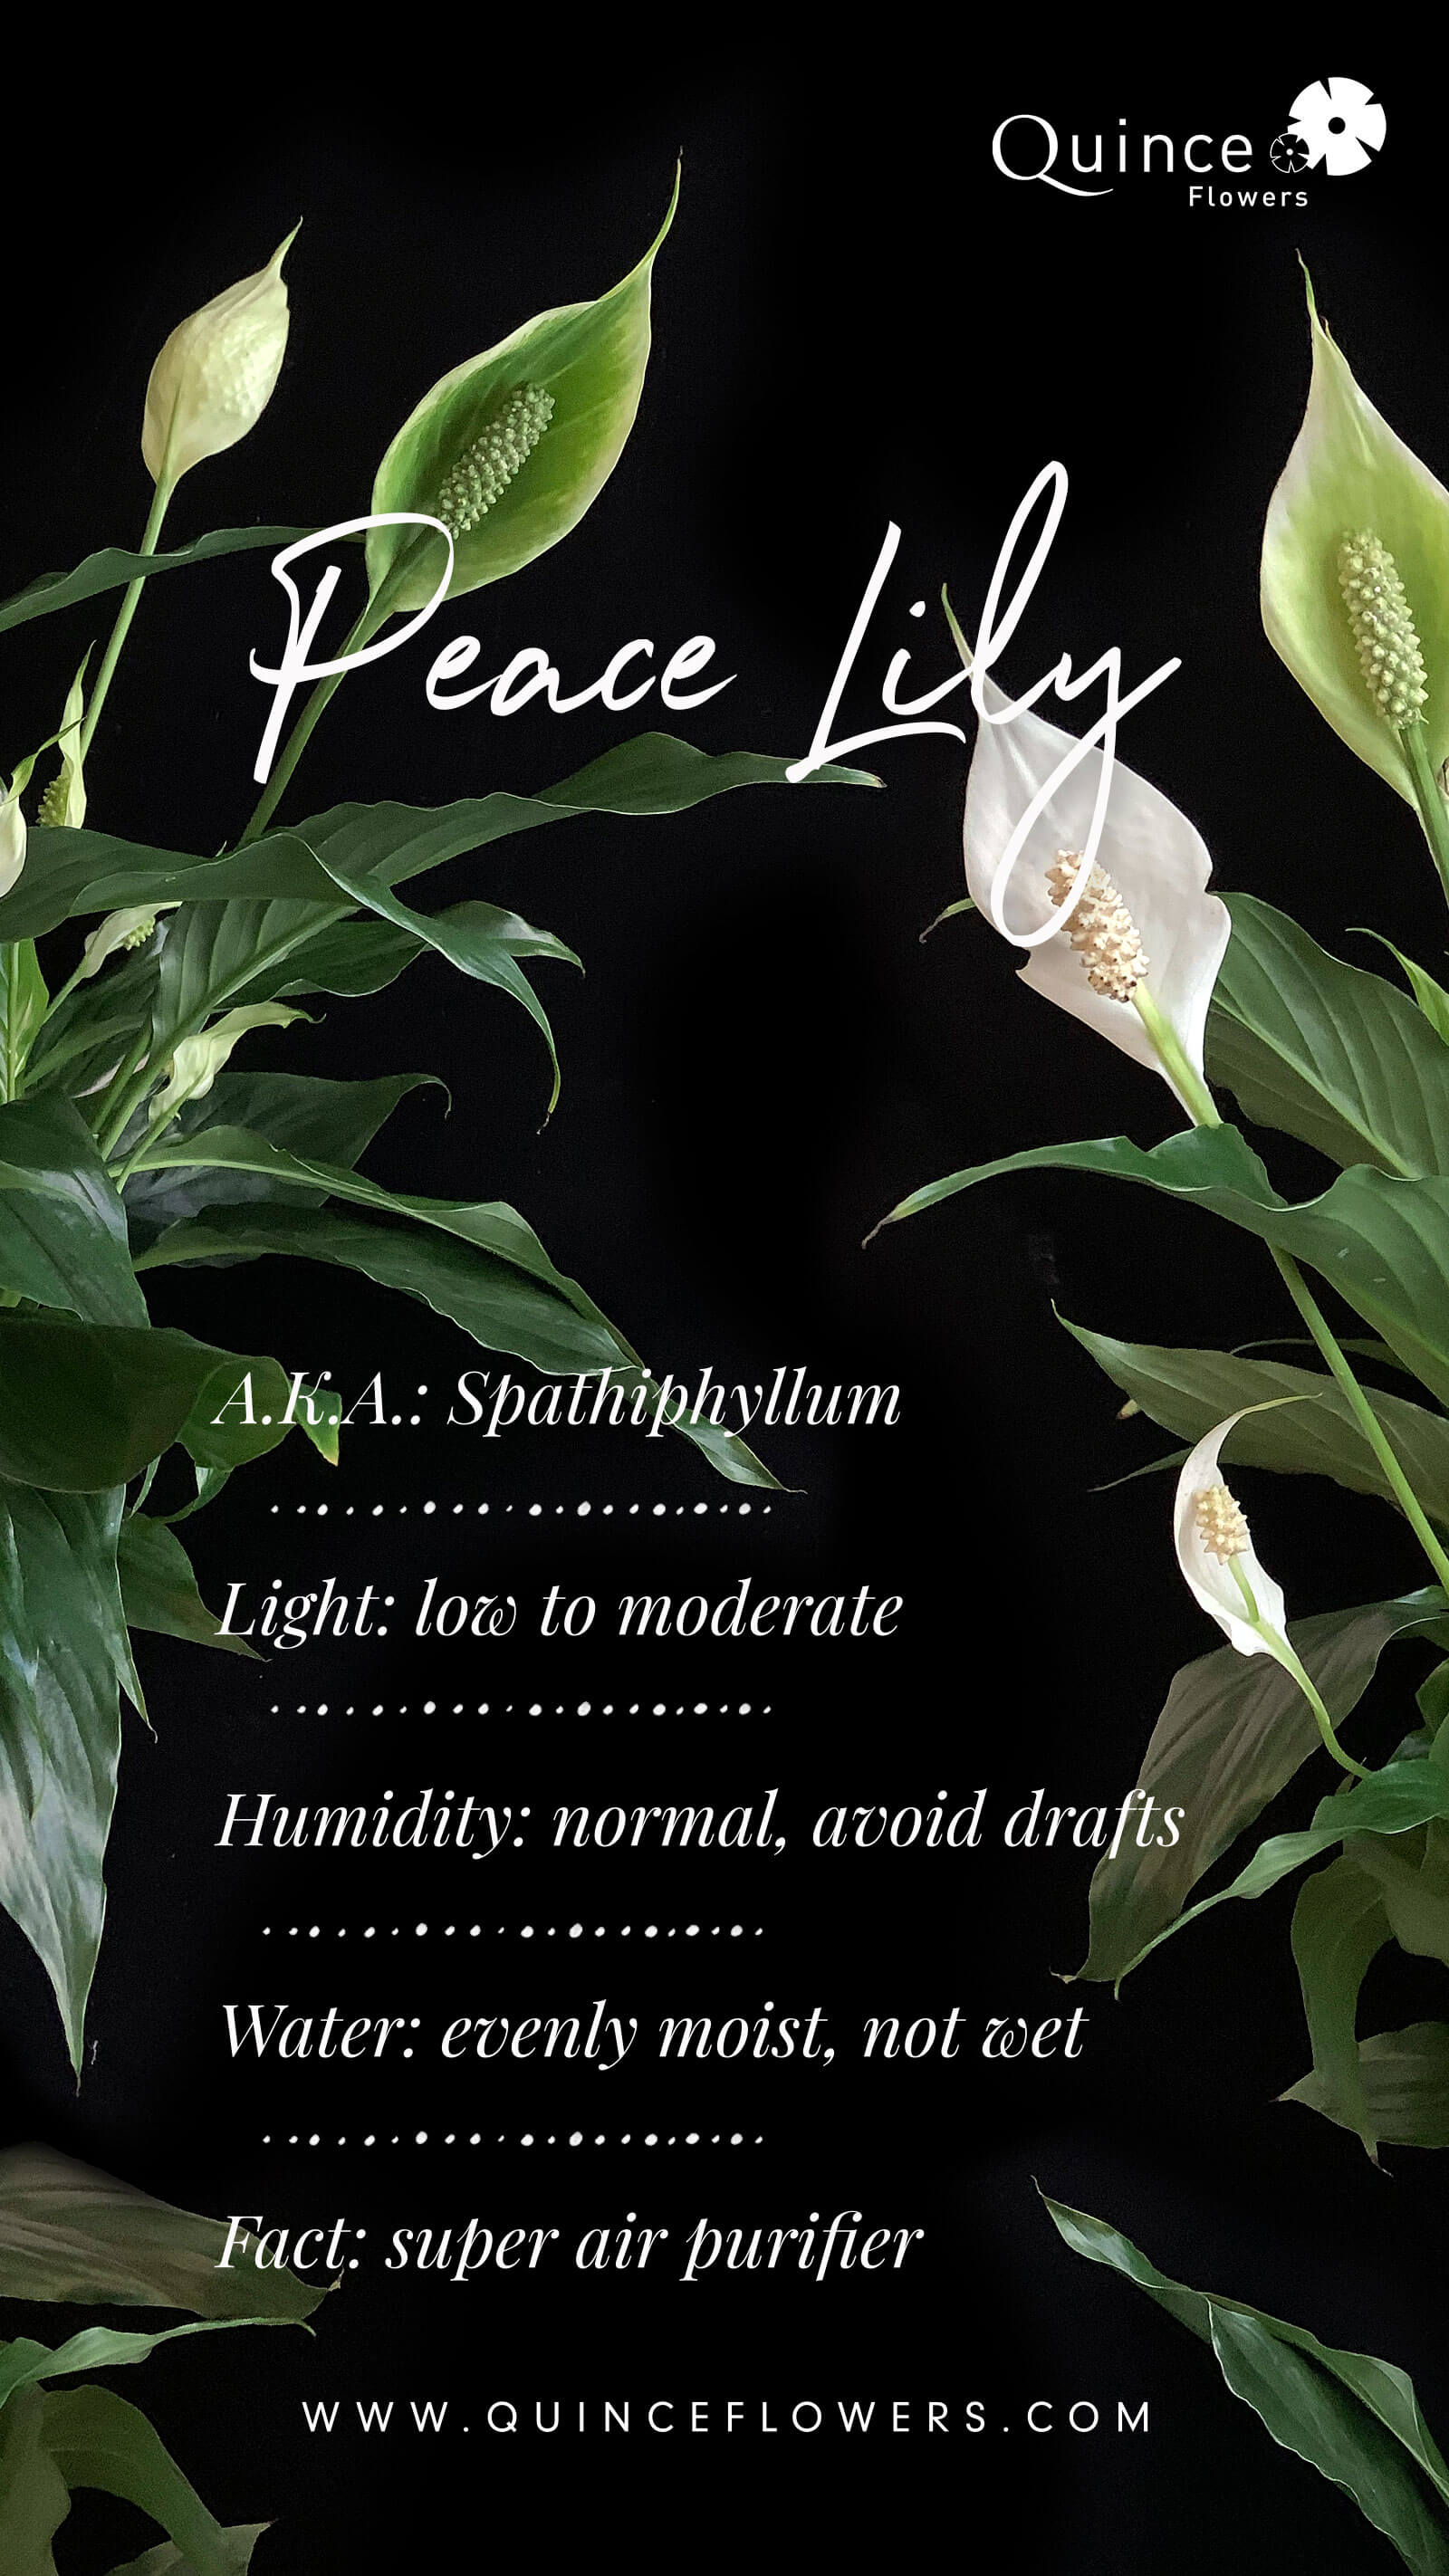 various views of peace lily plants against a dark background.Order online for plants & flowers from the best florist in Toronto near you.